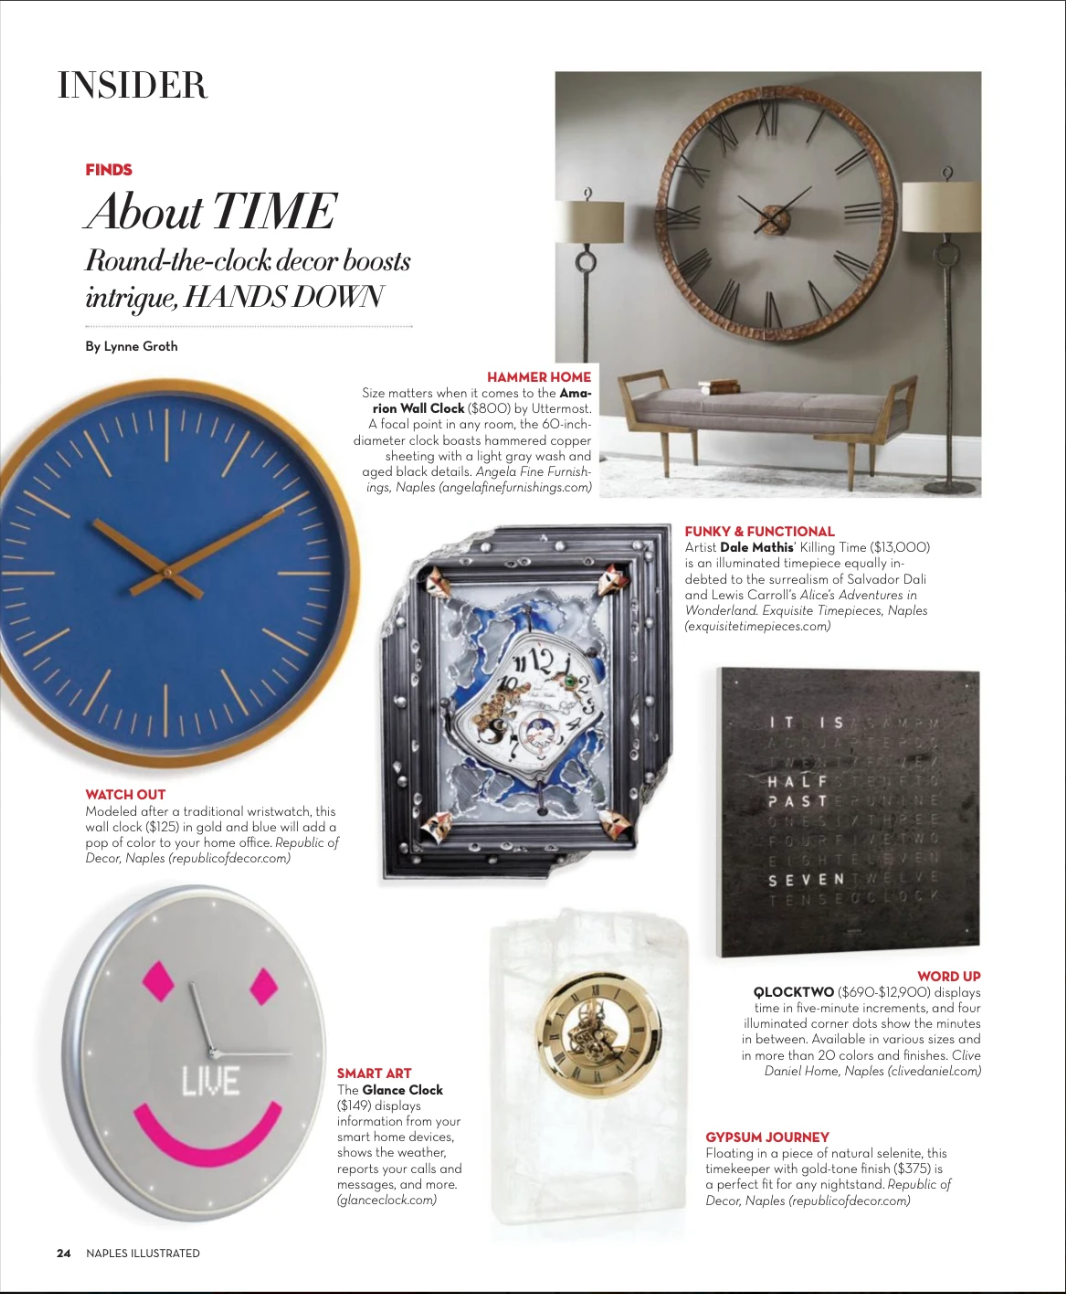 Insider feature for Republic of Decor, featuring a gold and blue wall clock.